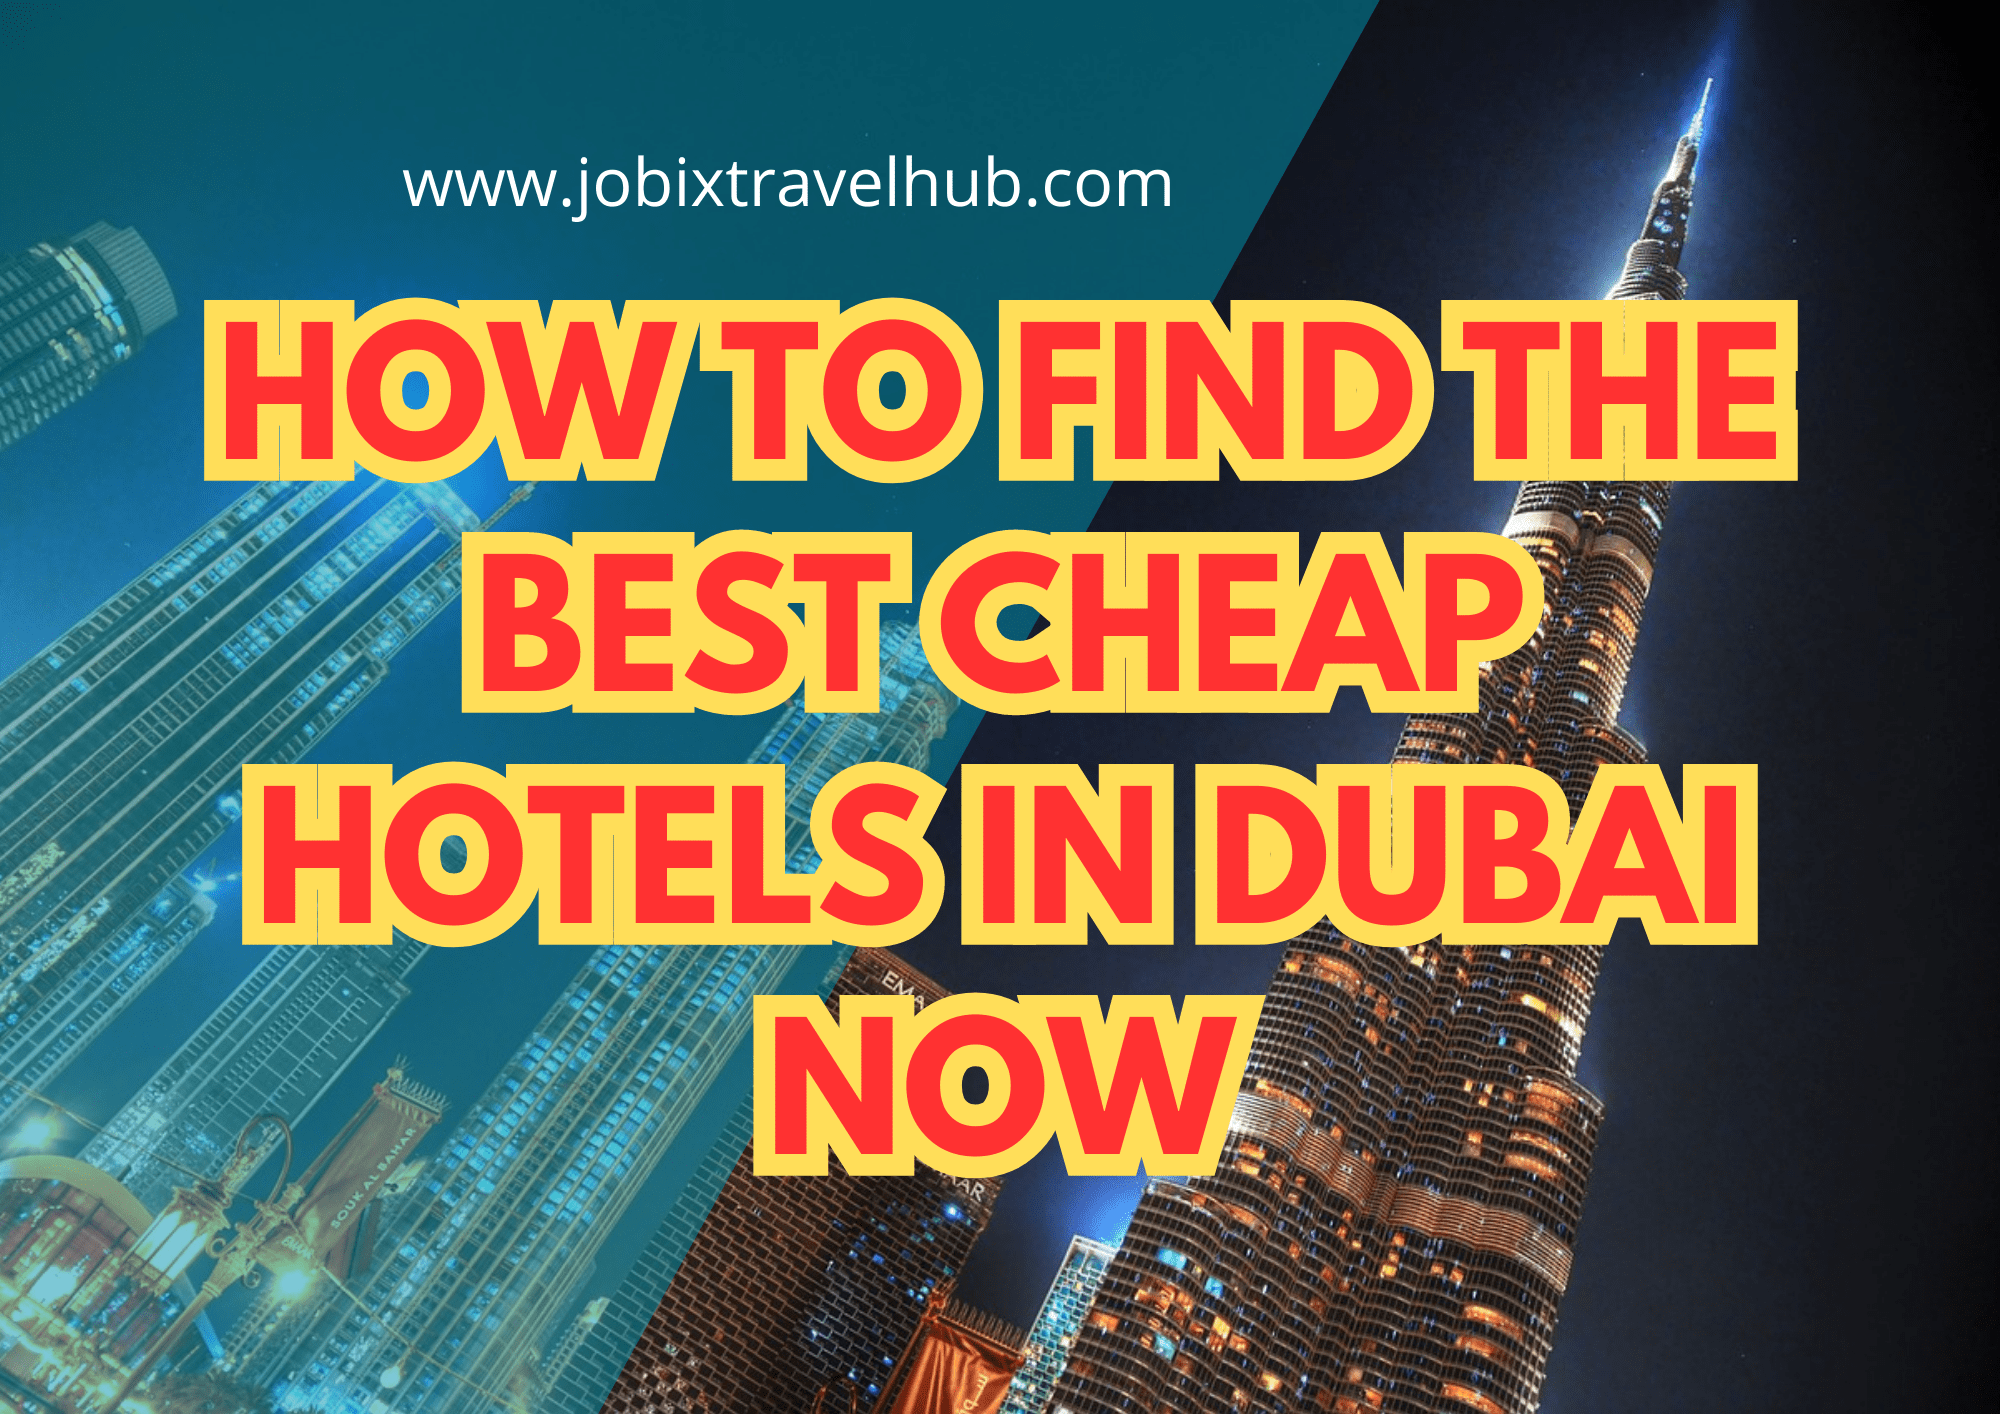 How To Find The Best Cheap Hotels In Dubai Now